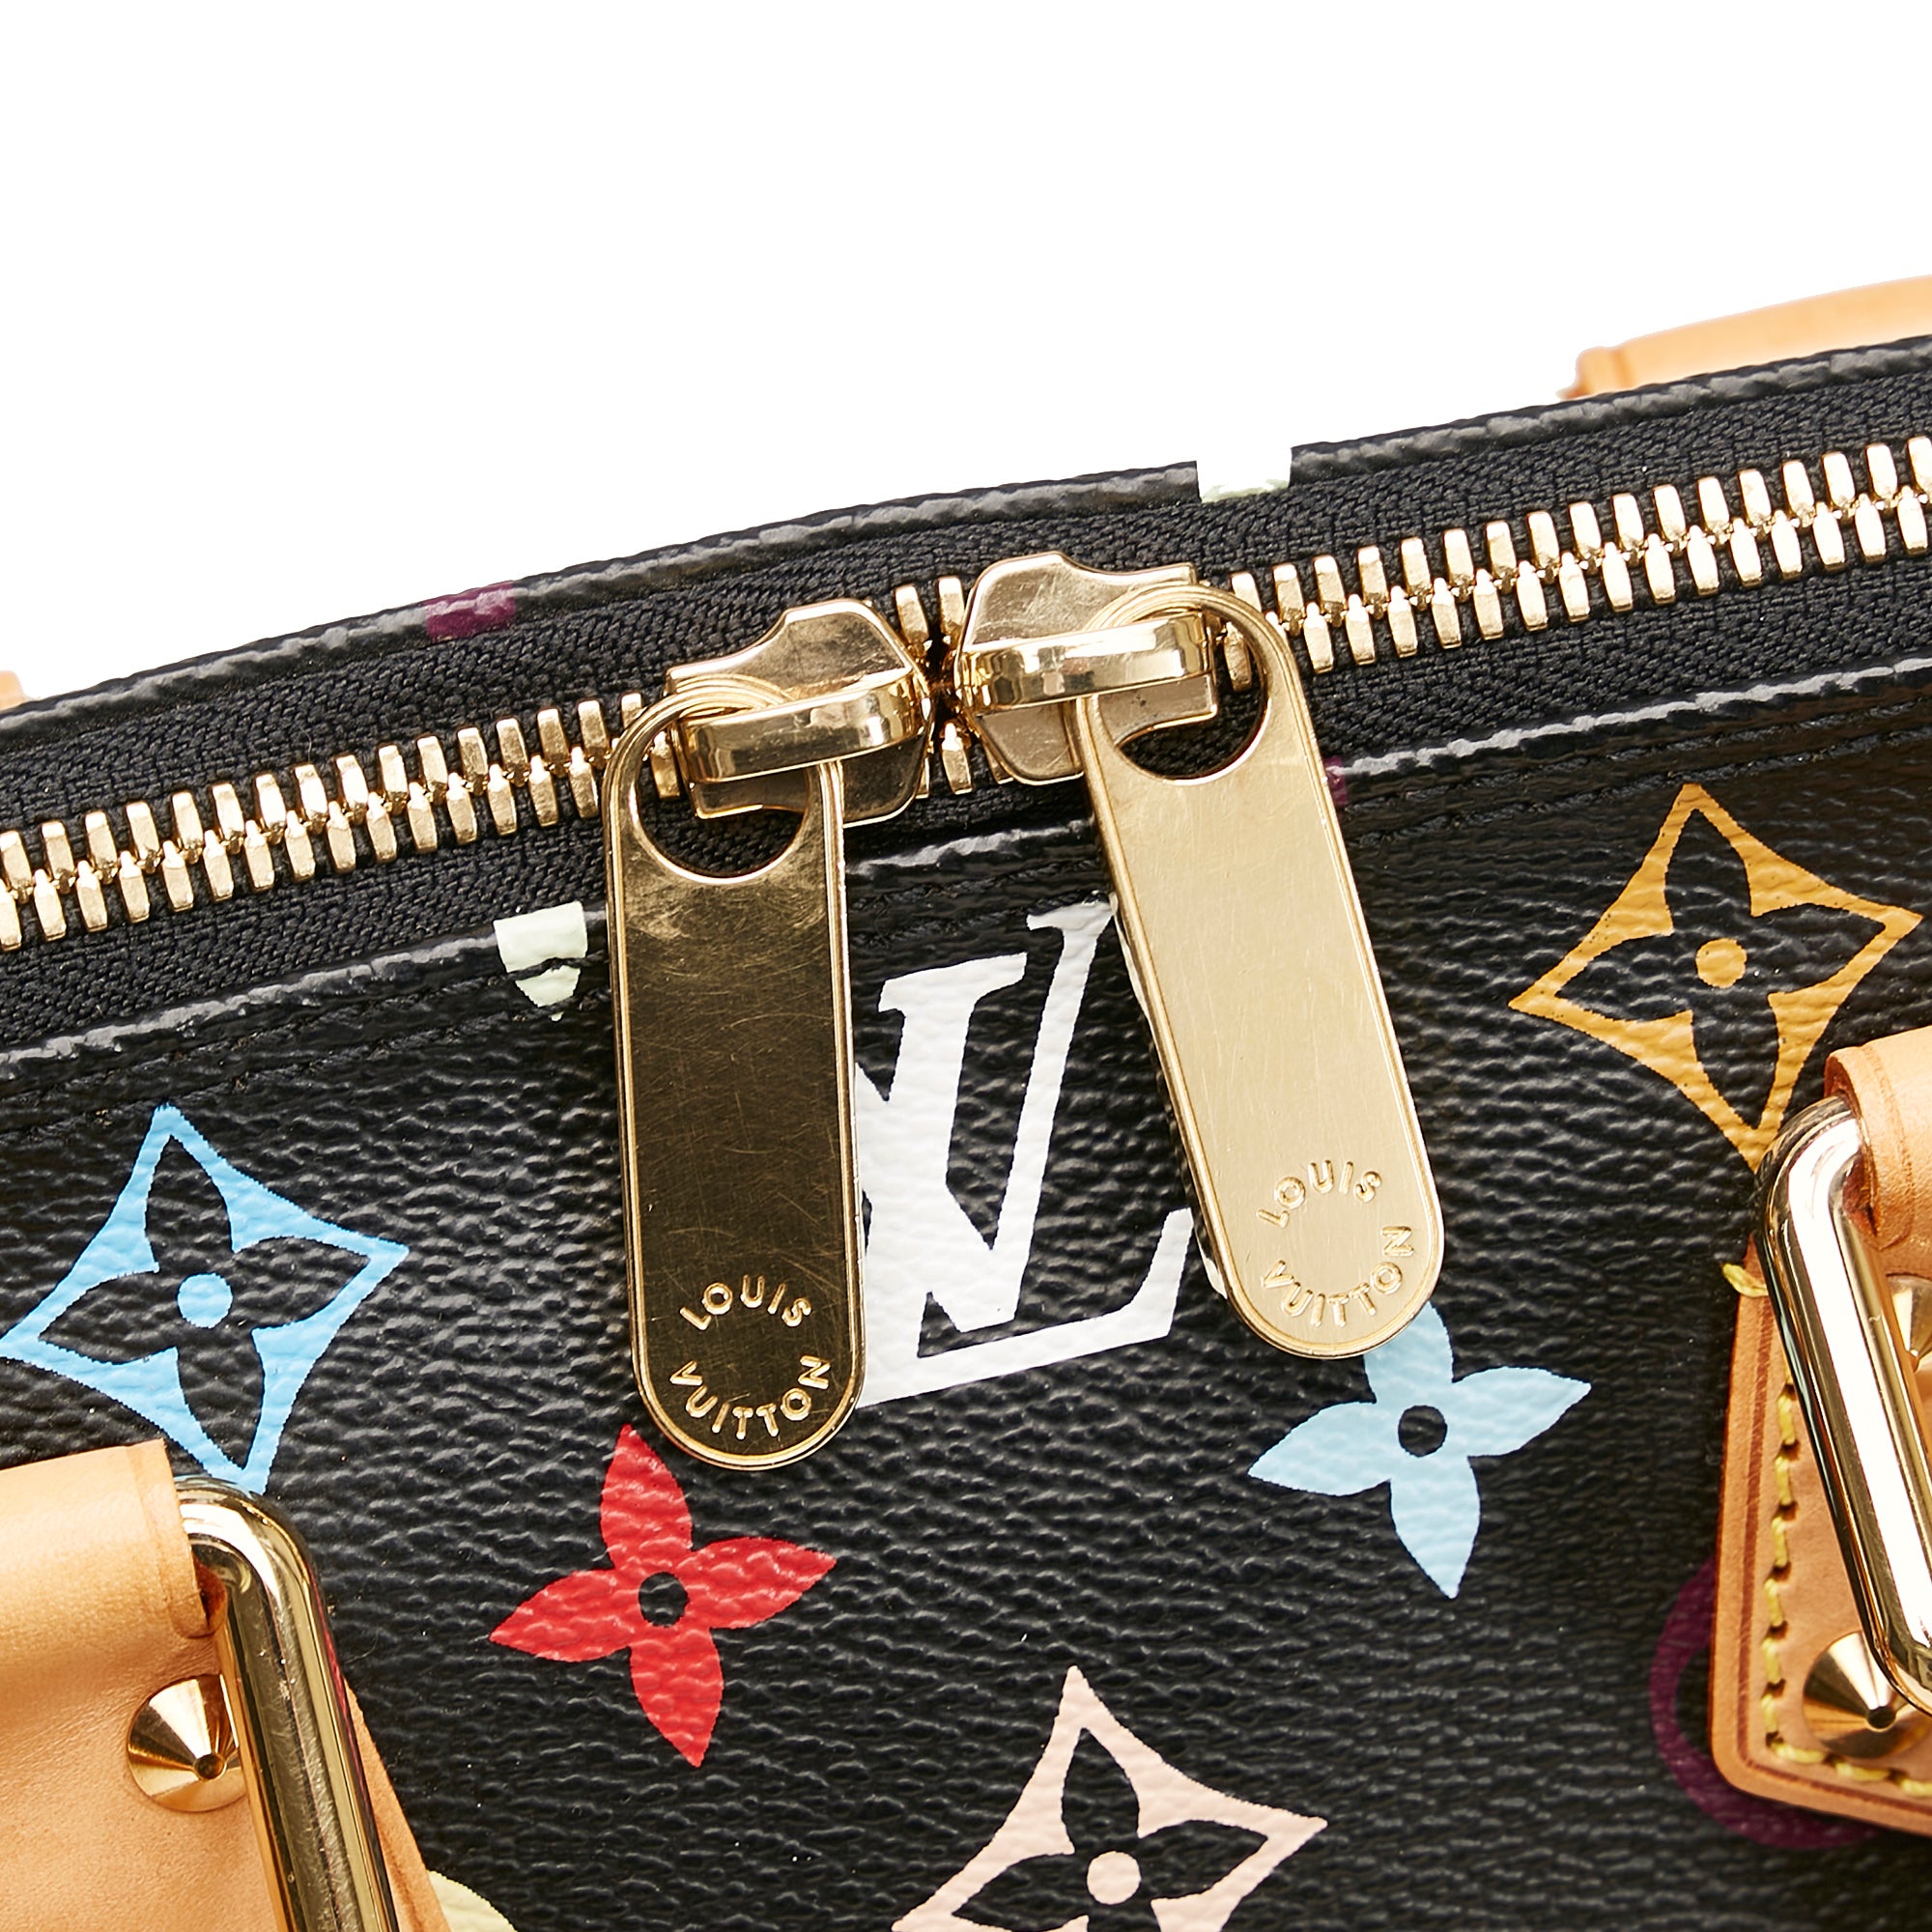 From the Speedy to the Alma, a history of Louis Vuitton handbags